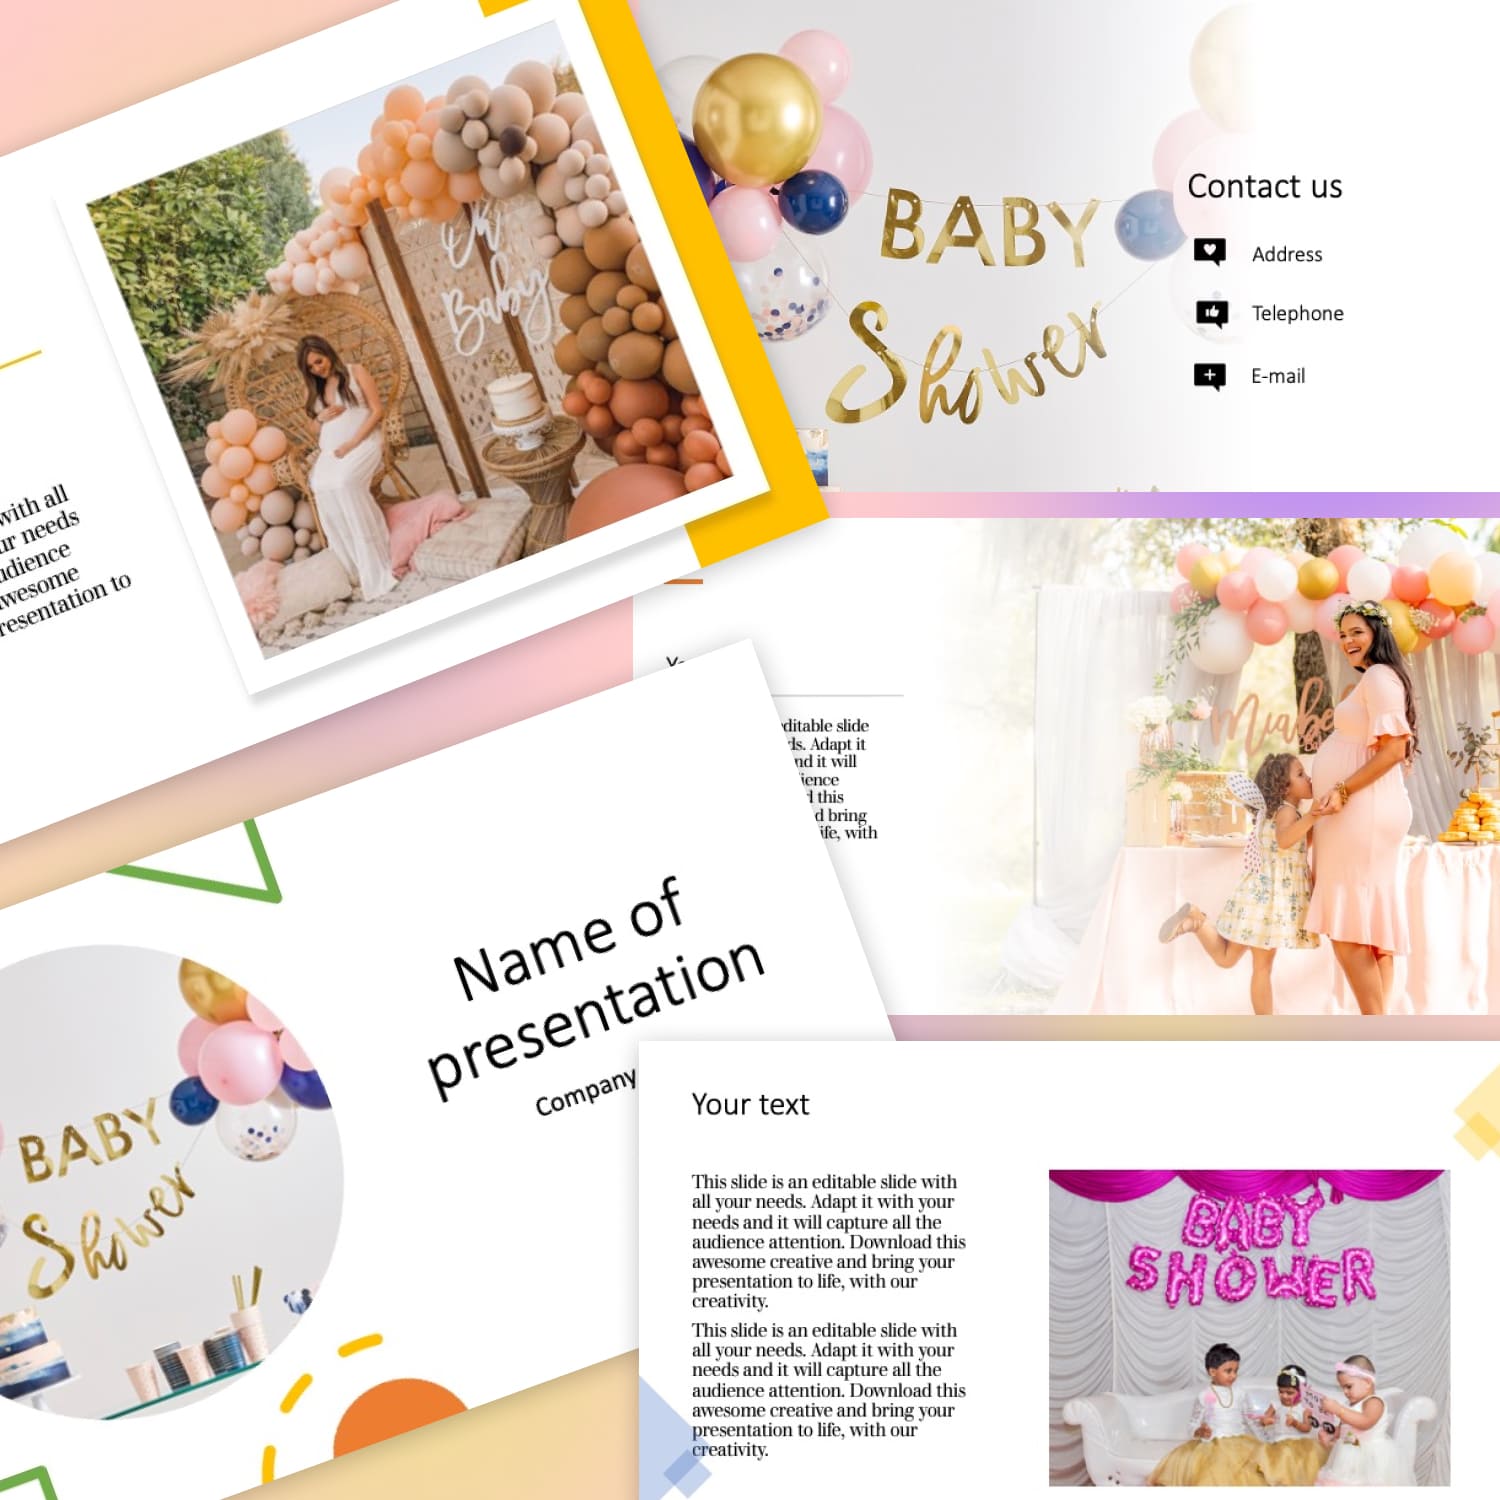 Images with Baby Shower Powerpoint Template Free.